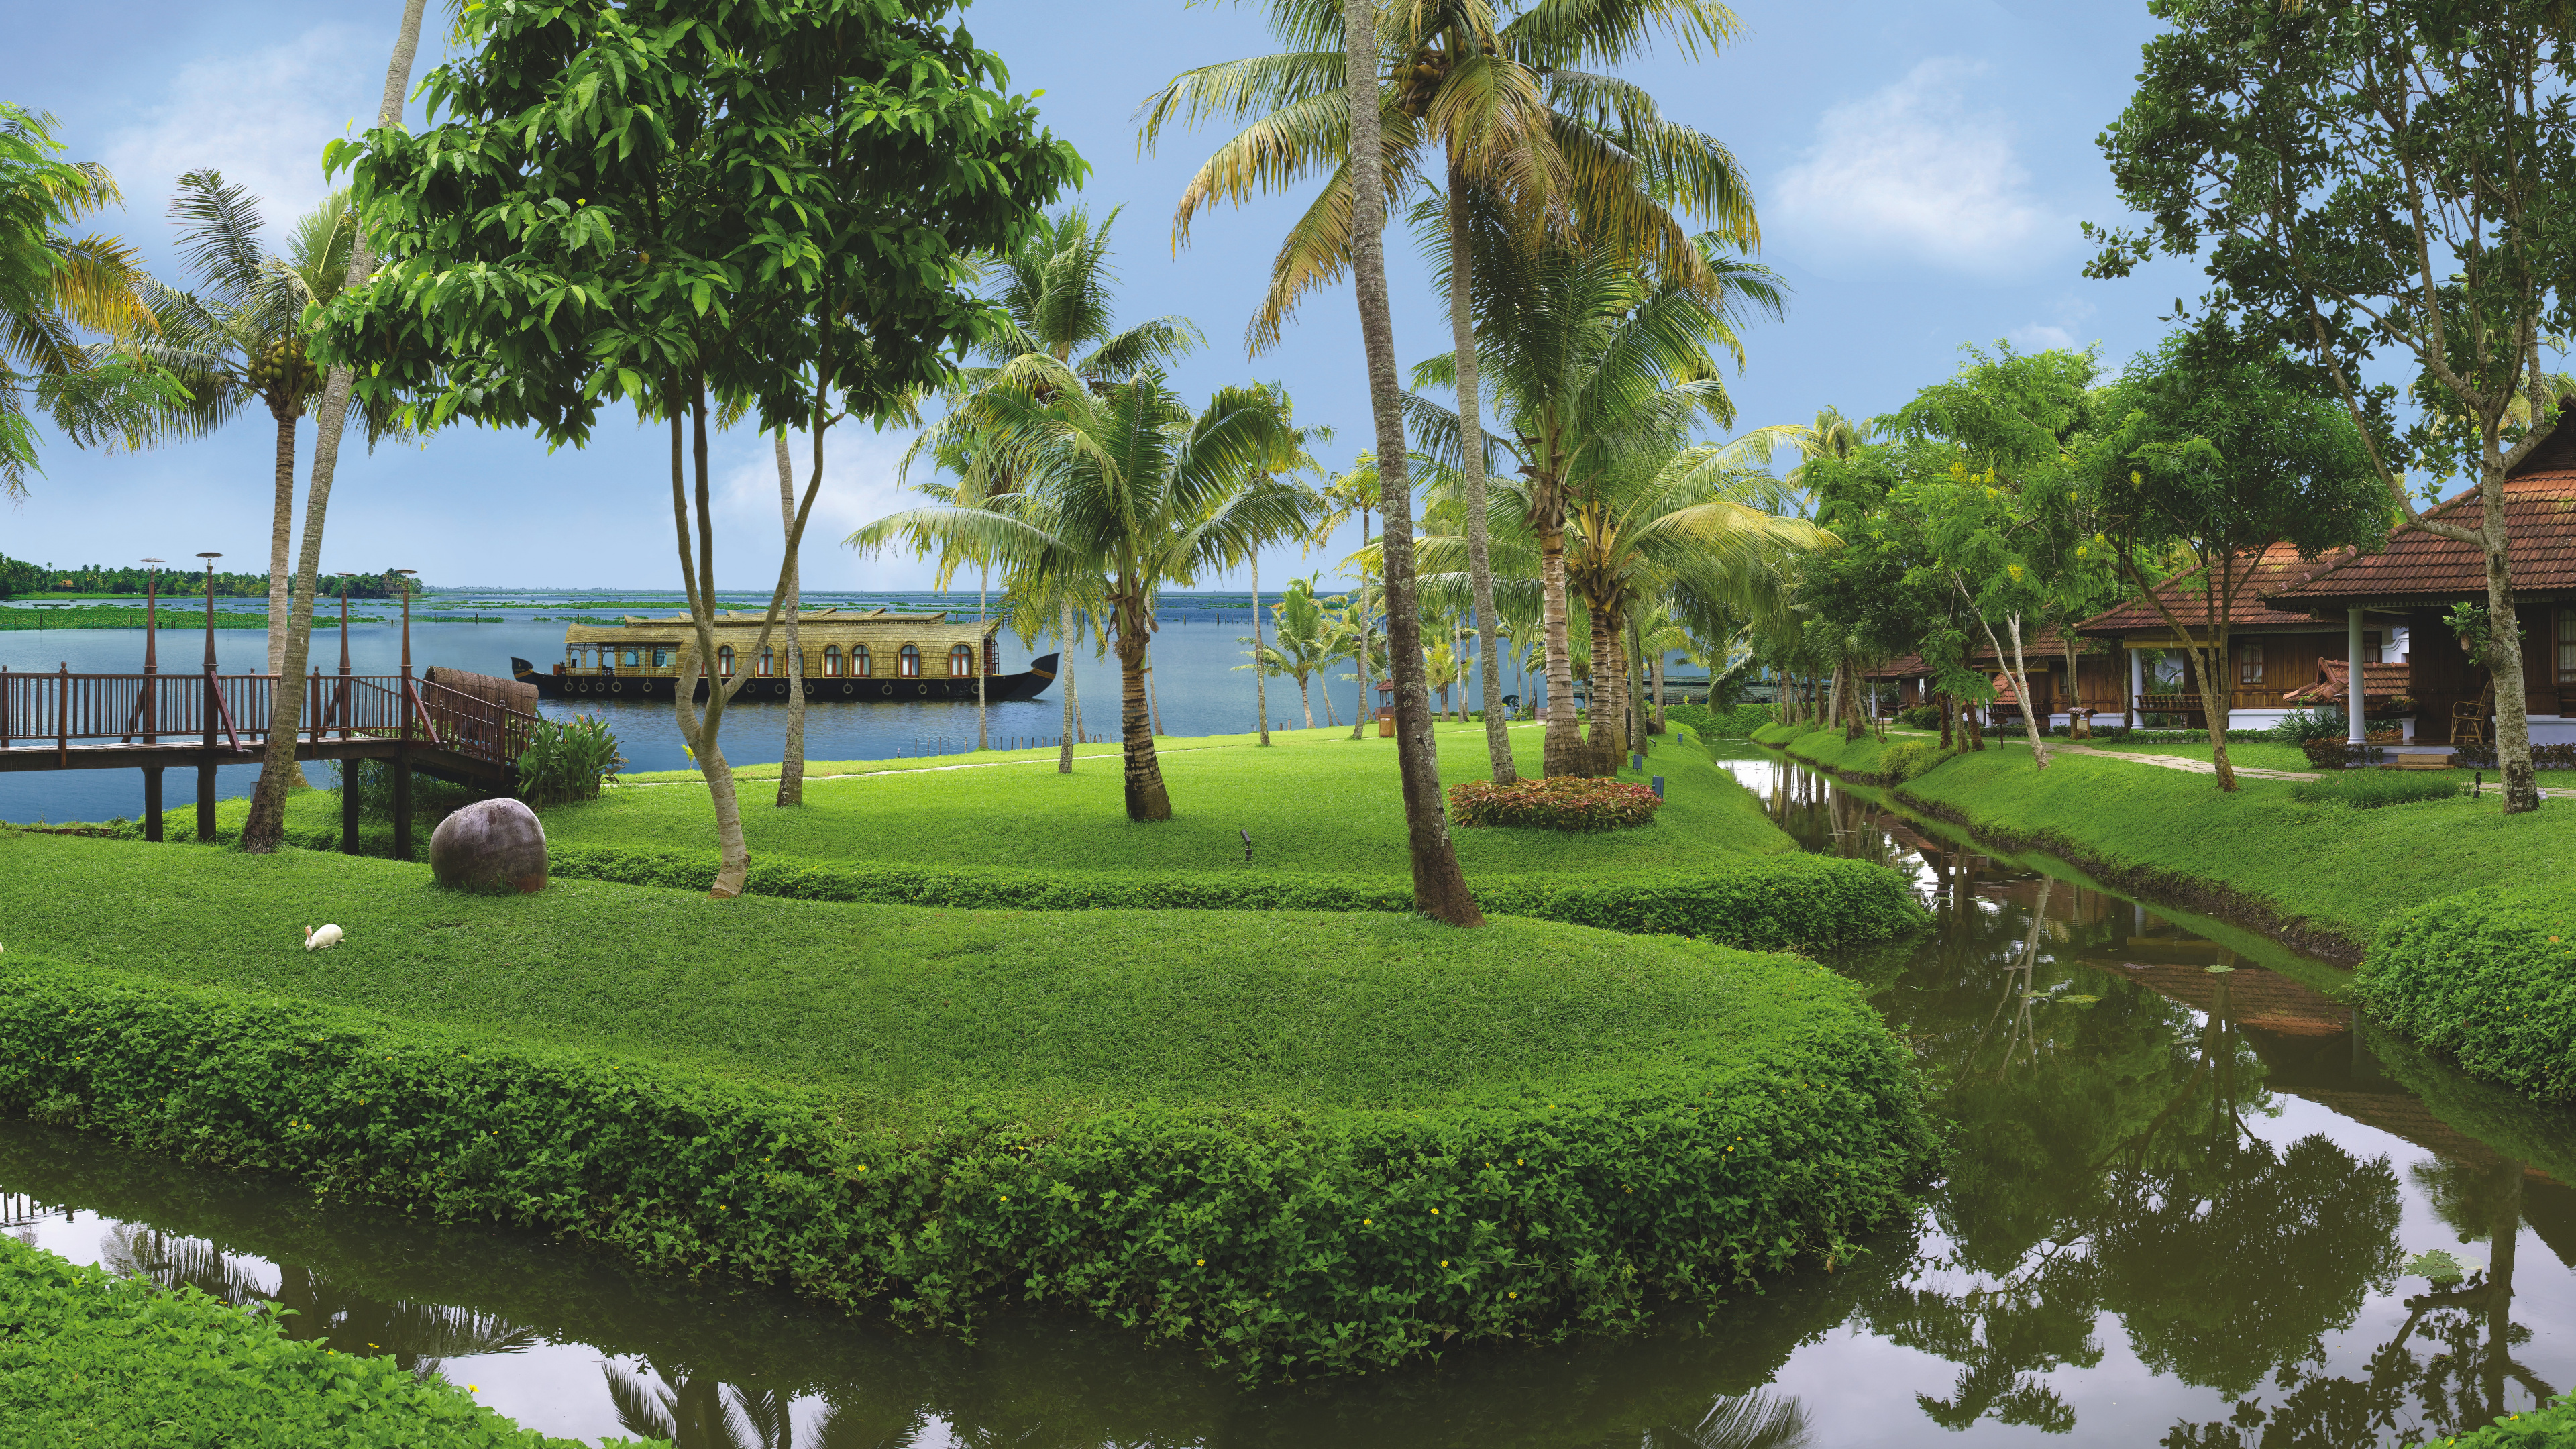 Green Palm Trees Near Body of Water During Daytime. Wallpaper in 3840x2160 Resolution